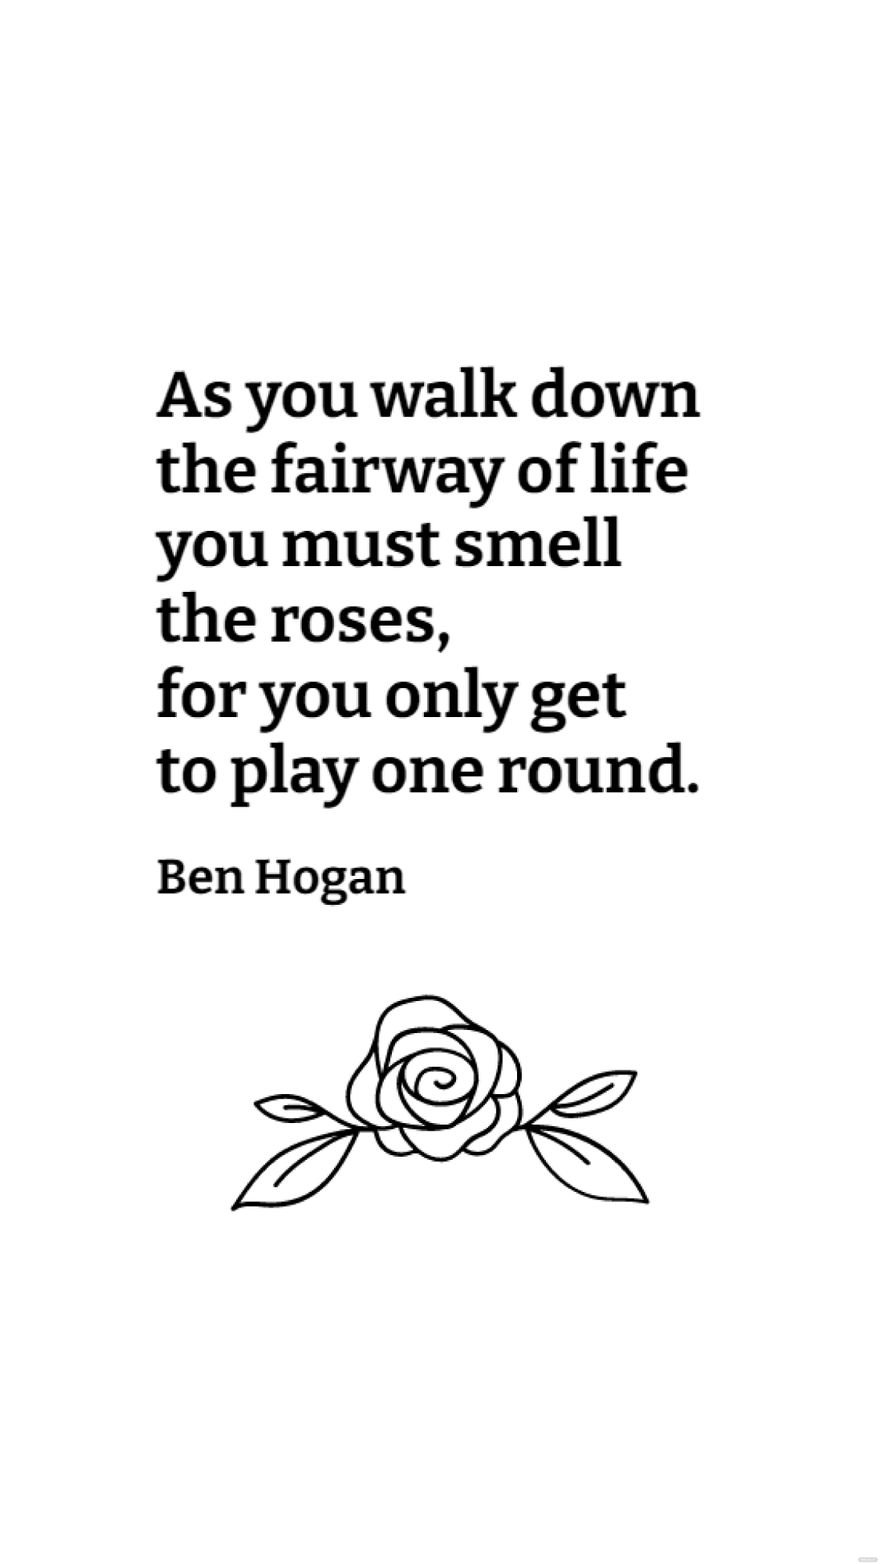 Free Ben Hogan - As you walk down the fairway of life you must smell the roses, for you only get to play one round. in JPG